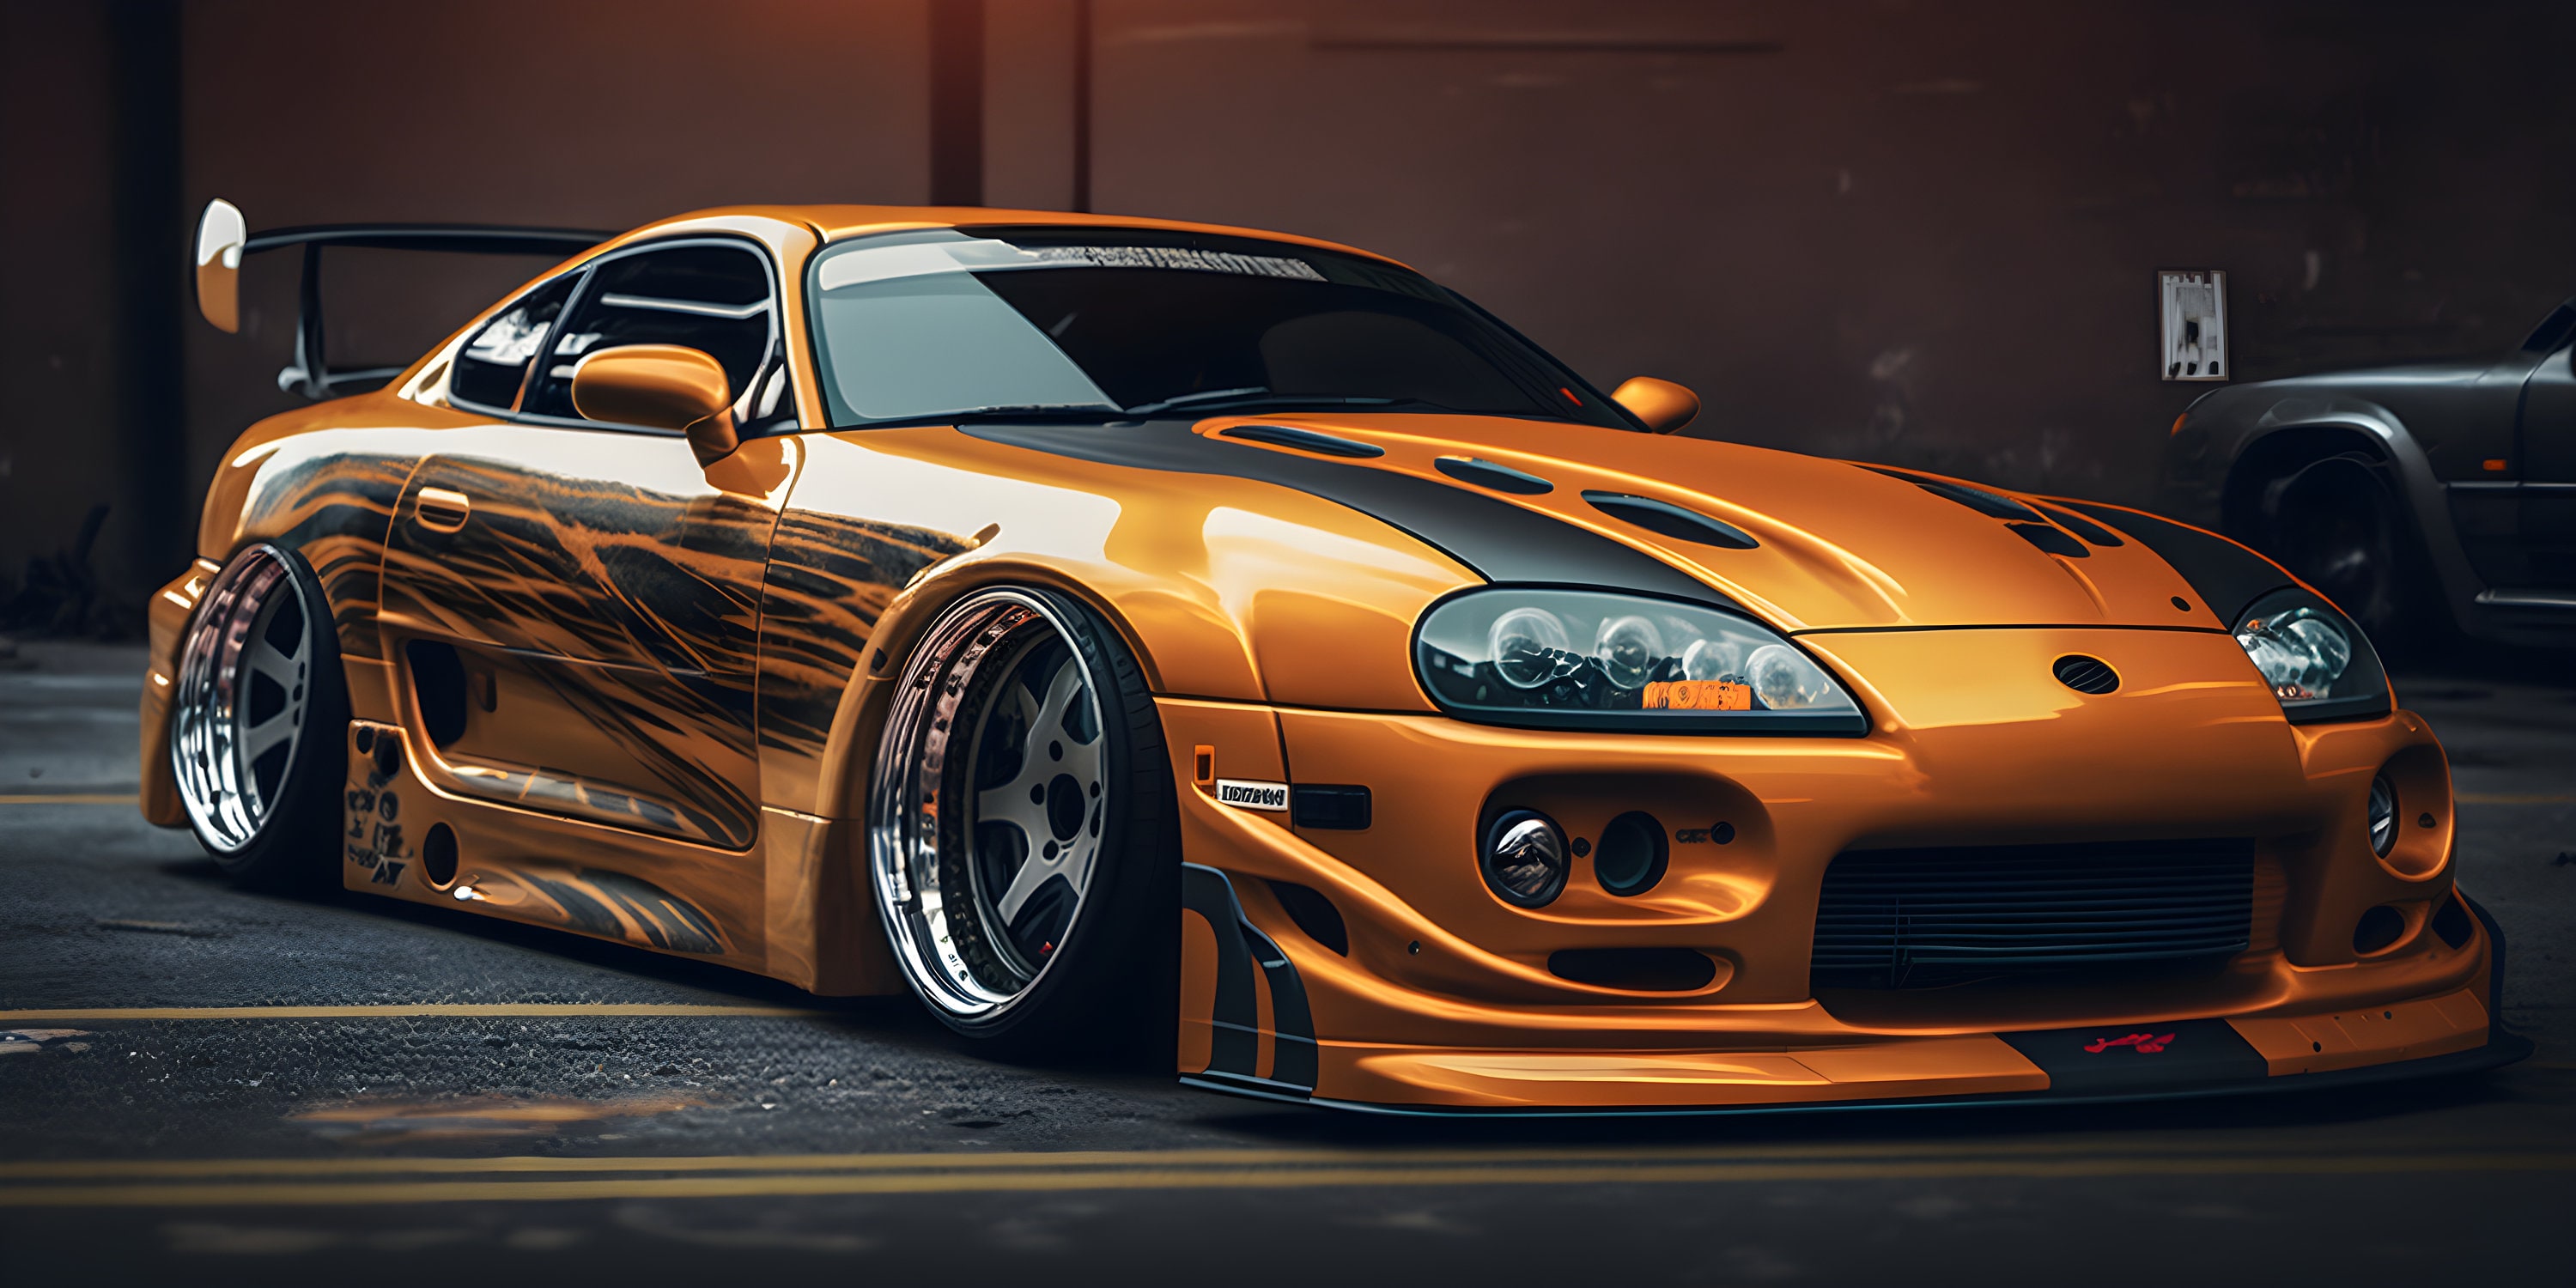 Mk4 Toyota Supra in Striking Orange and Black Racing Paintjob - Perfect for  Car Enthusiasts!